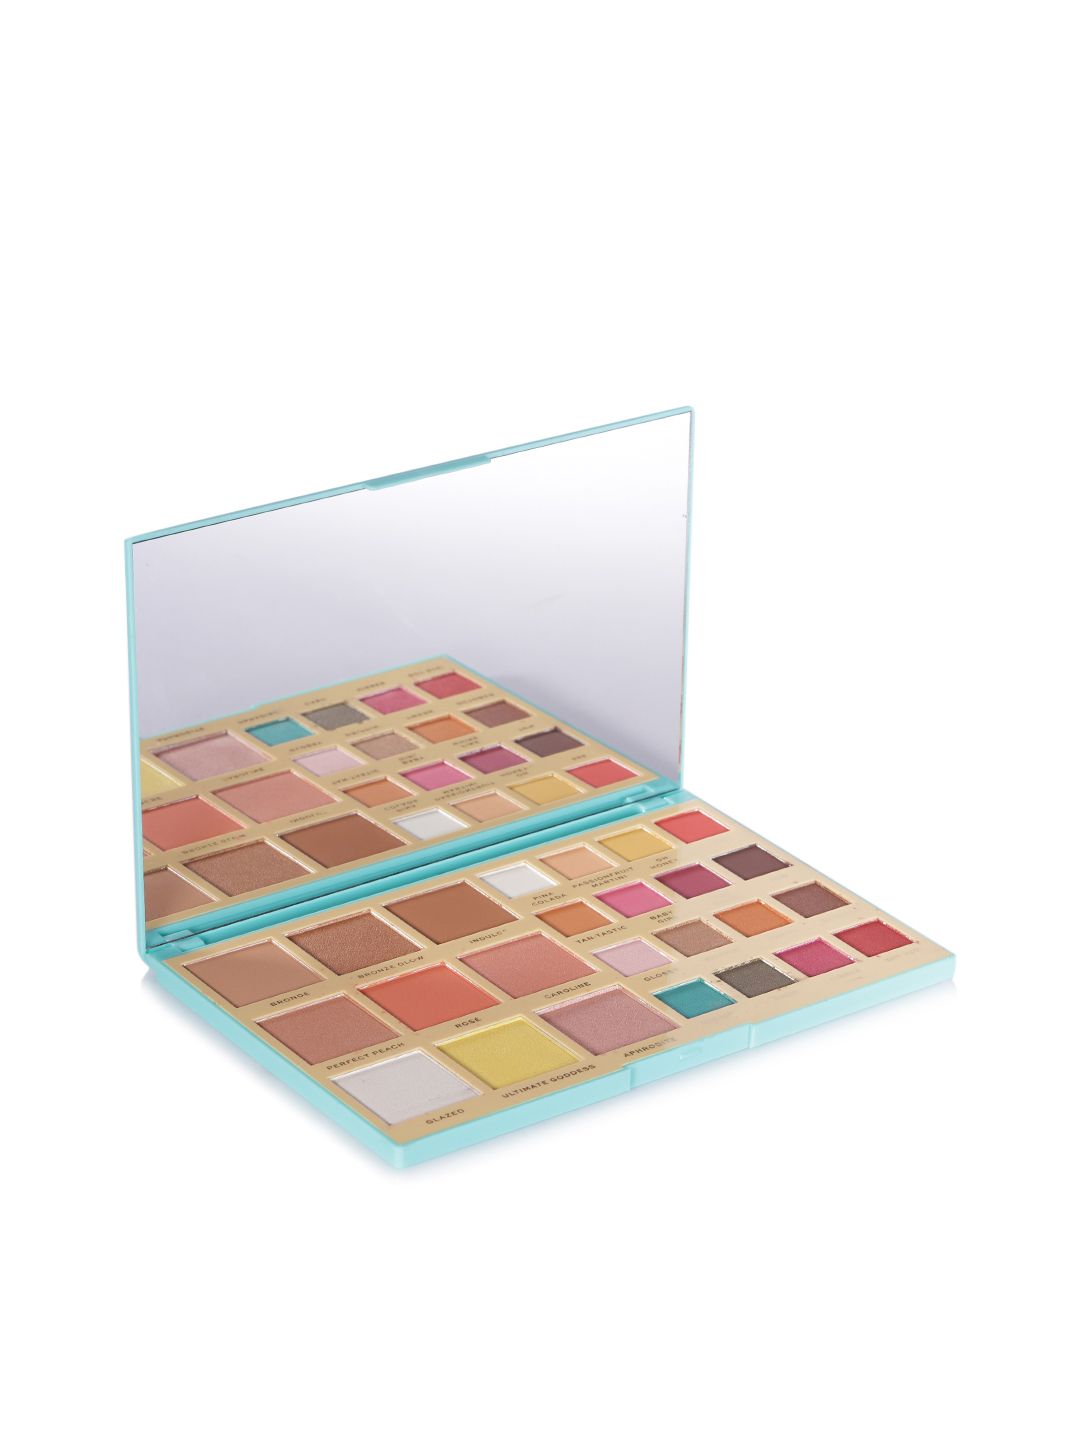 Makeup Revolution London X Rachel Leary Eyeshadow Palette - Ultimate Goddess Price in India